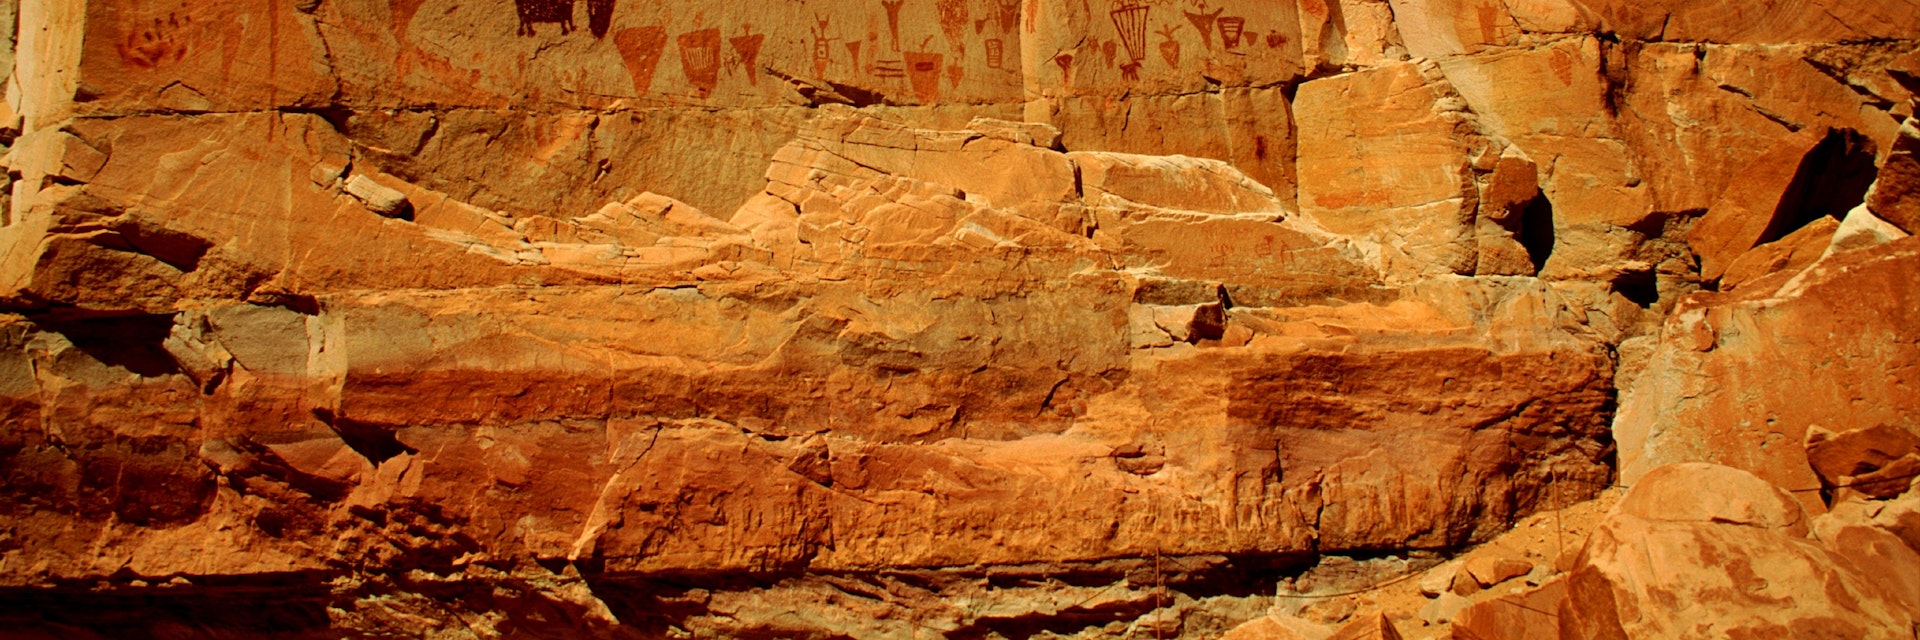 Utah, Pictographs, Horseshoe Shelter Detail, Horsehoe Canyon, Canyon lands National Park. (Photo by: Universal Images Group via Getty Images)